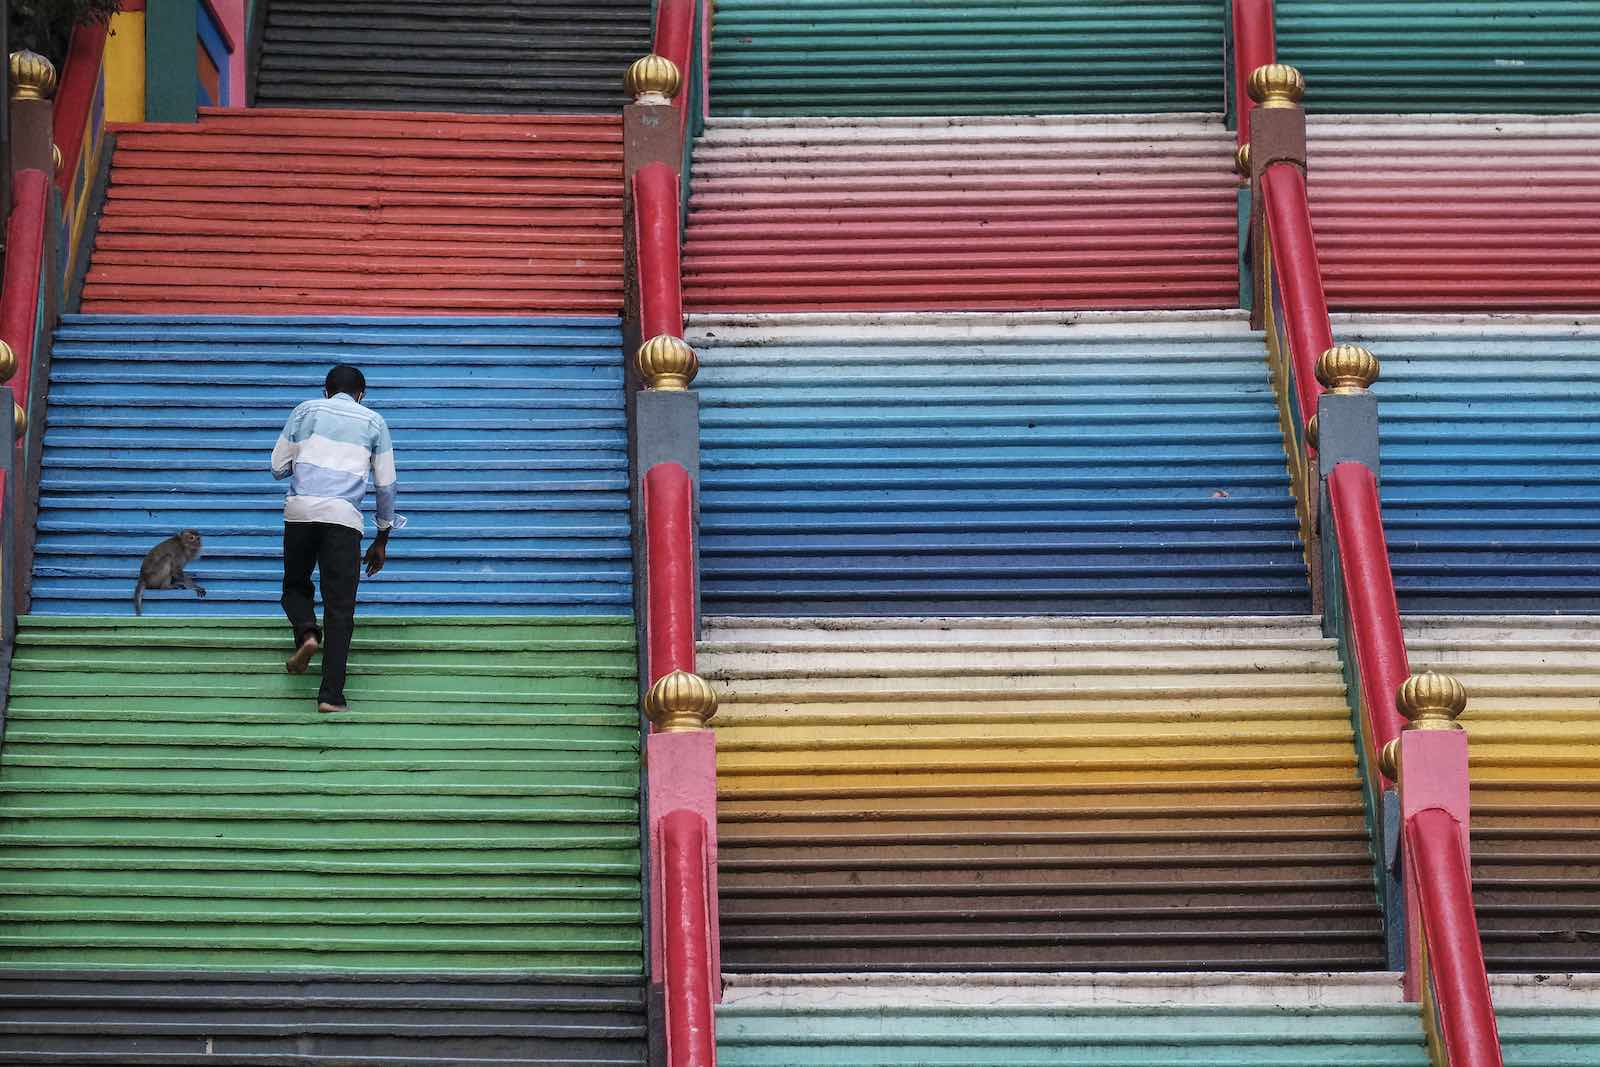 Climbing the stairs leading to the Sri Subramaniar Swamy temple at Batu Caves, Malaysia. Tourism has taken a big hit during the pandemic (Faris Hadziq via Getty Images)